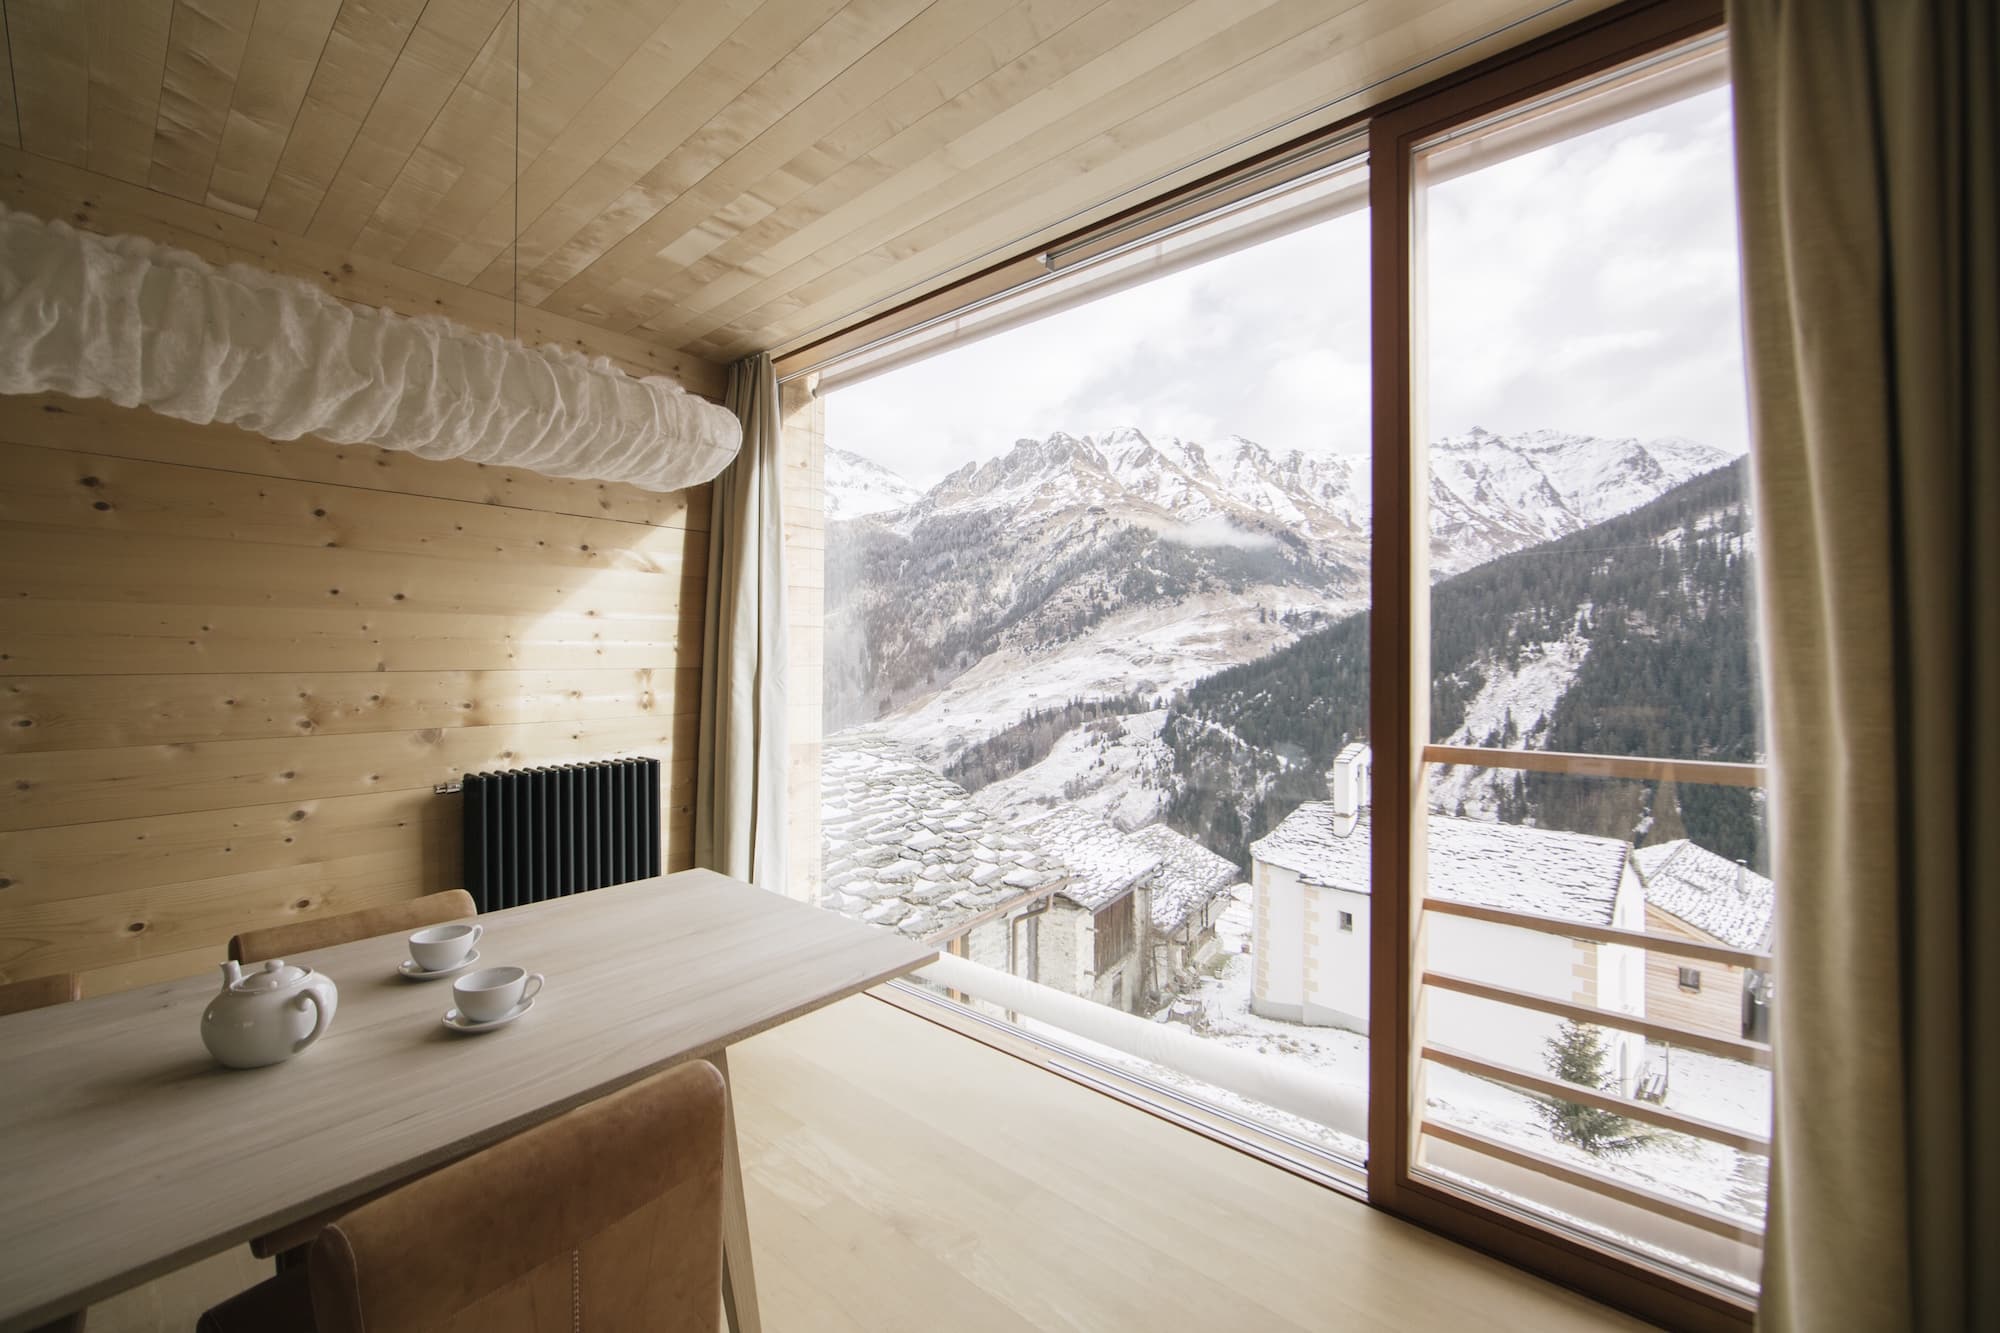 Only Peter Zumthor could make a spartan pine interior look this luxe.